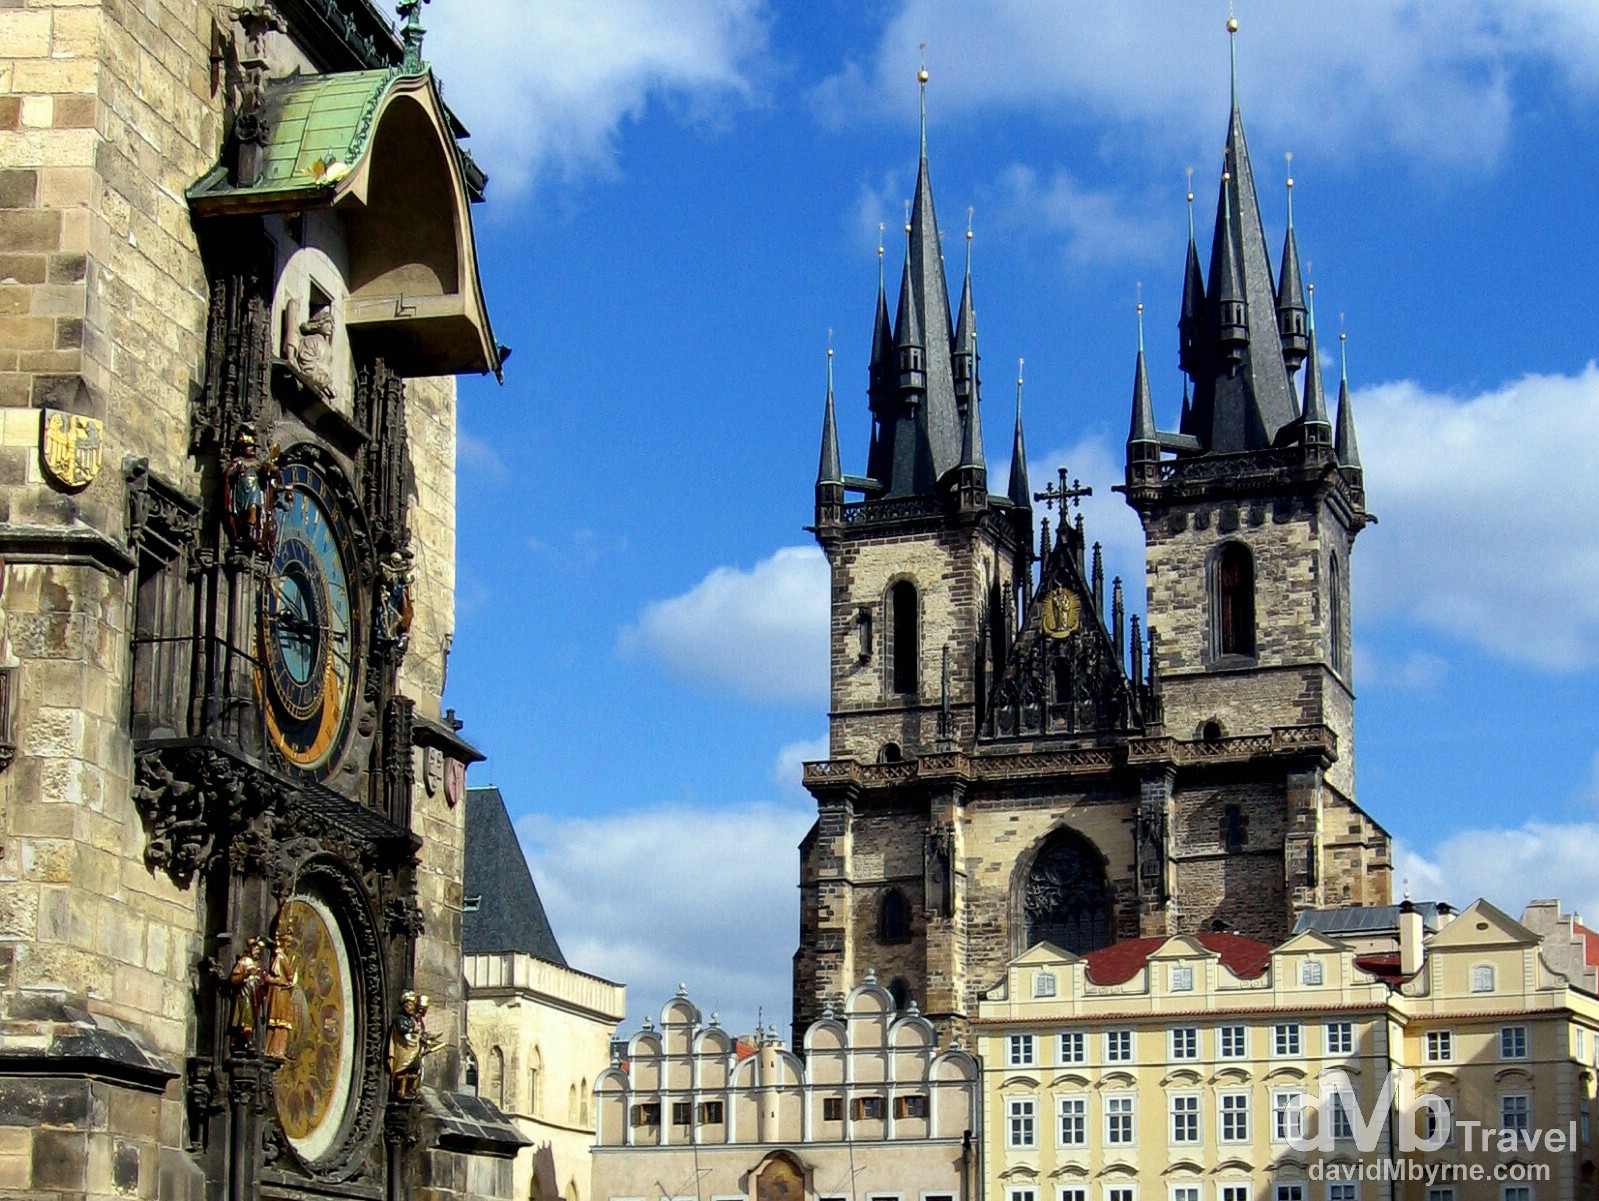 The famous Astronomical Clock of Old Town Hall & the twin towers of the Gothic Týn Church on Old Town Square, Prague, Czech Republic. March 8, 2006.  